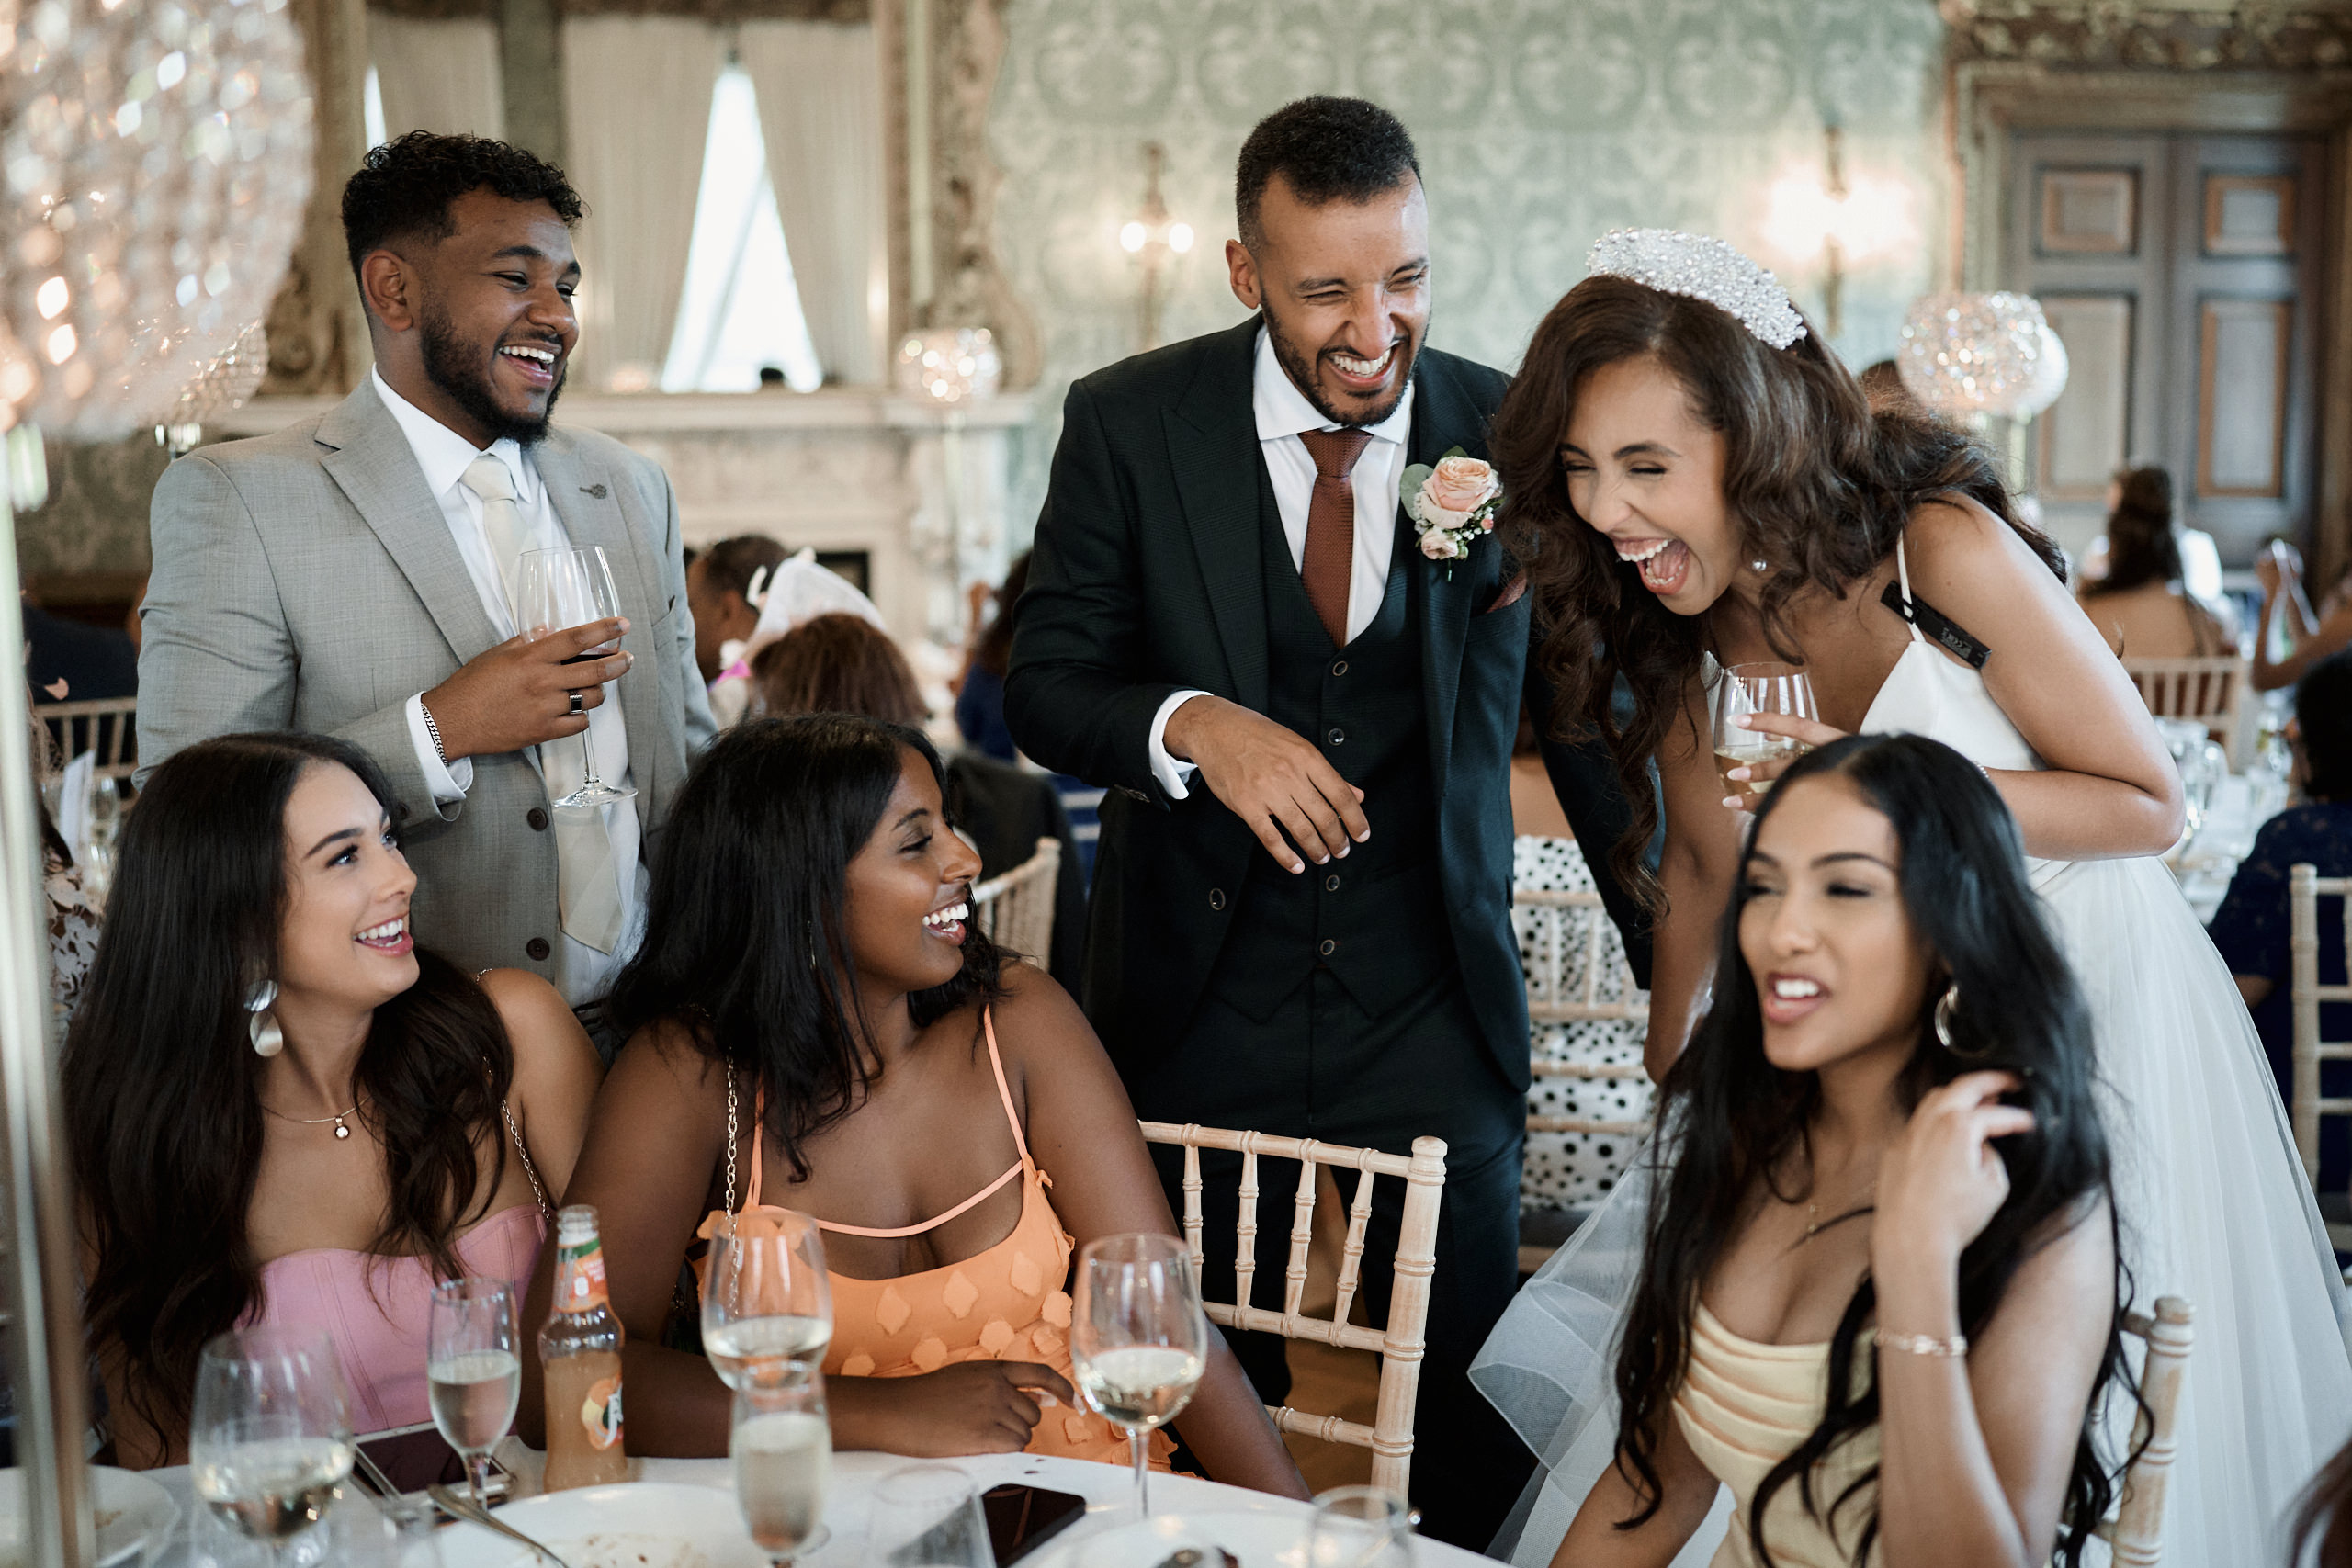 A bunch of people cracking up at a wedding party.